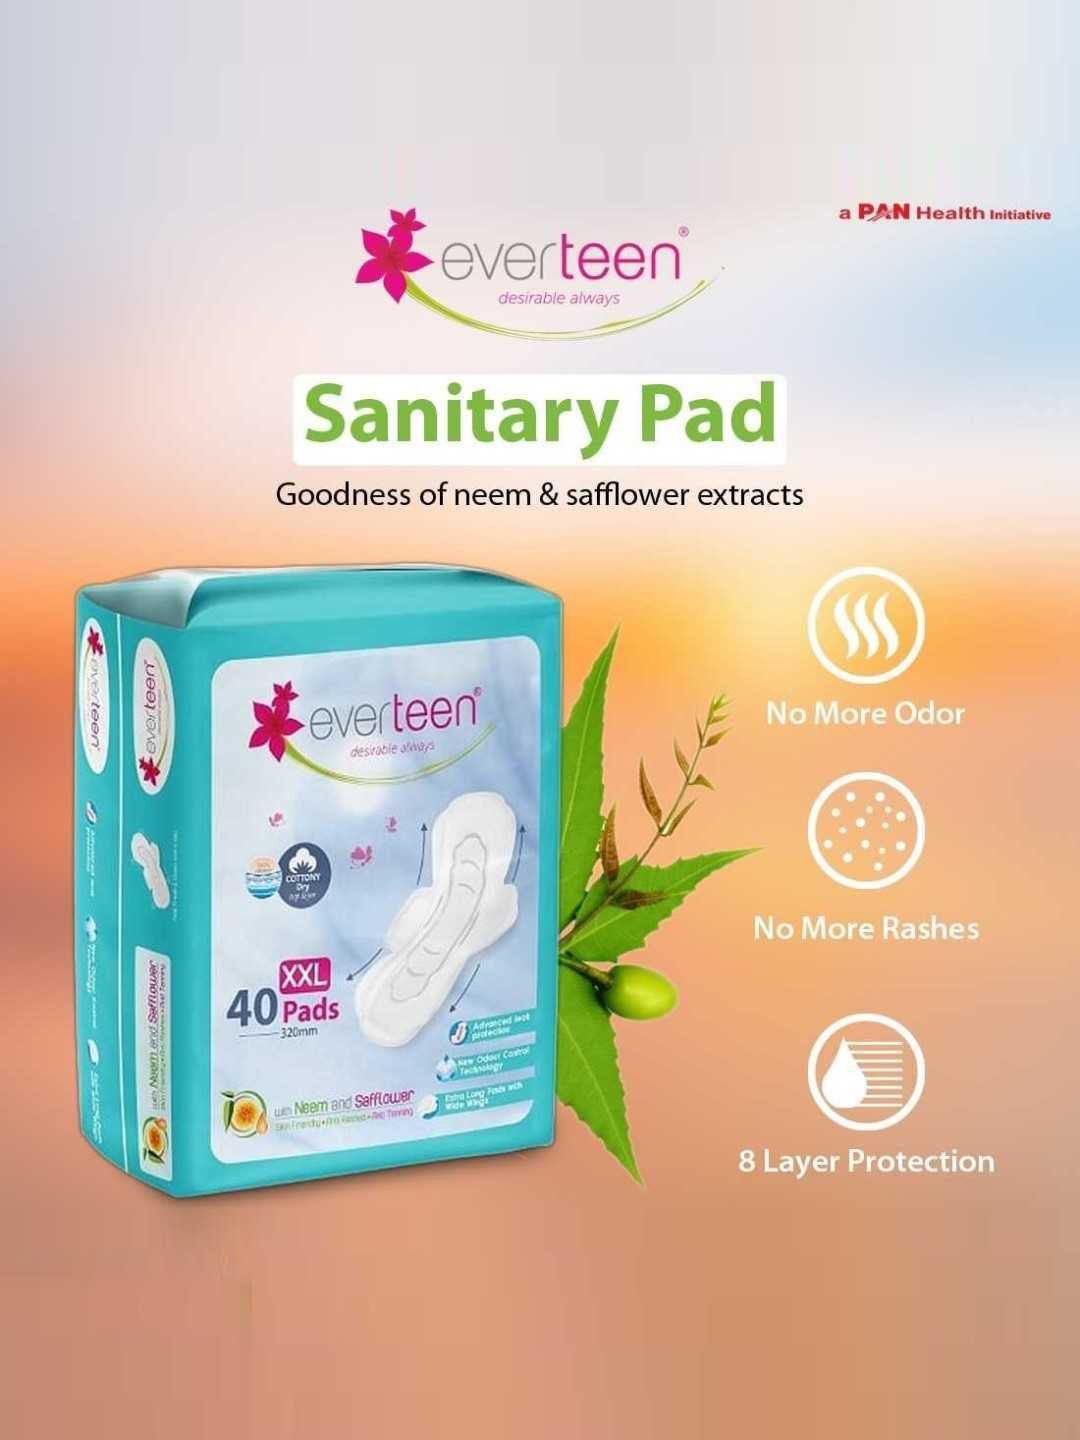 everteen set of 2 xxl sanitary napkin pads with dry top layer - 40 pads each